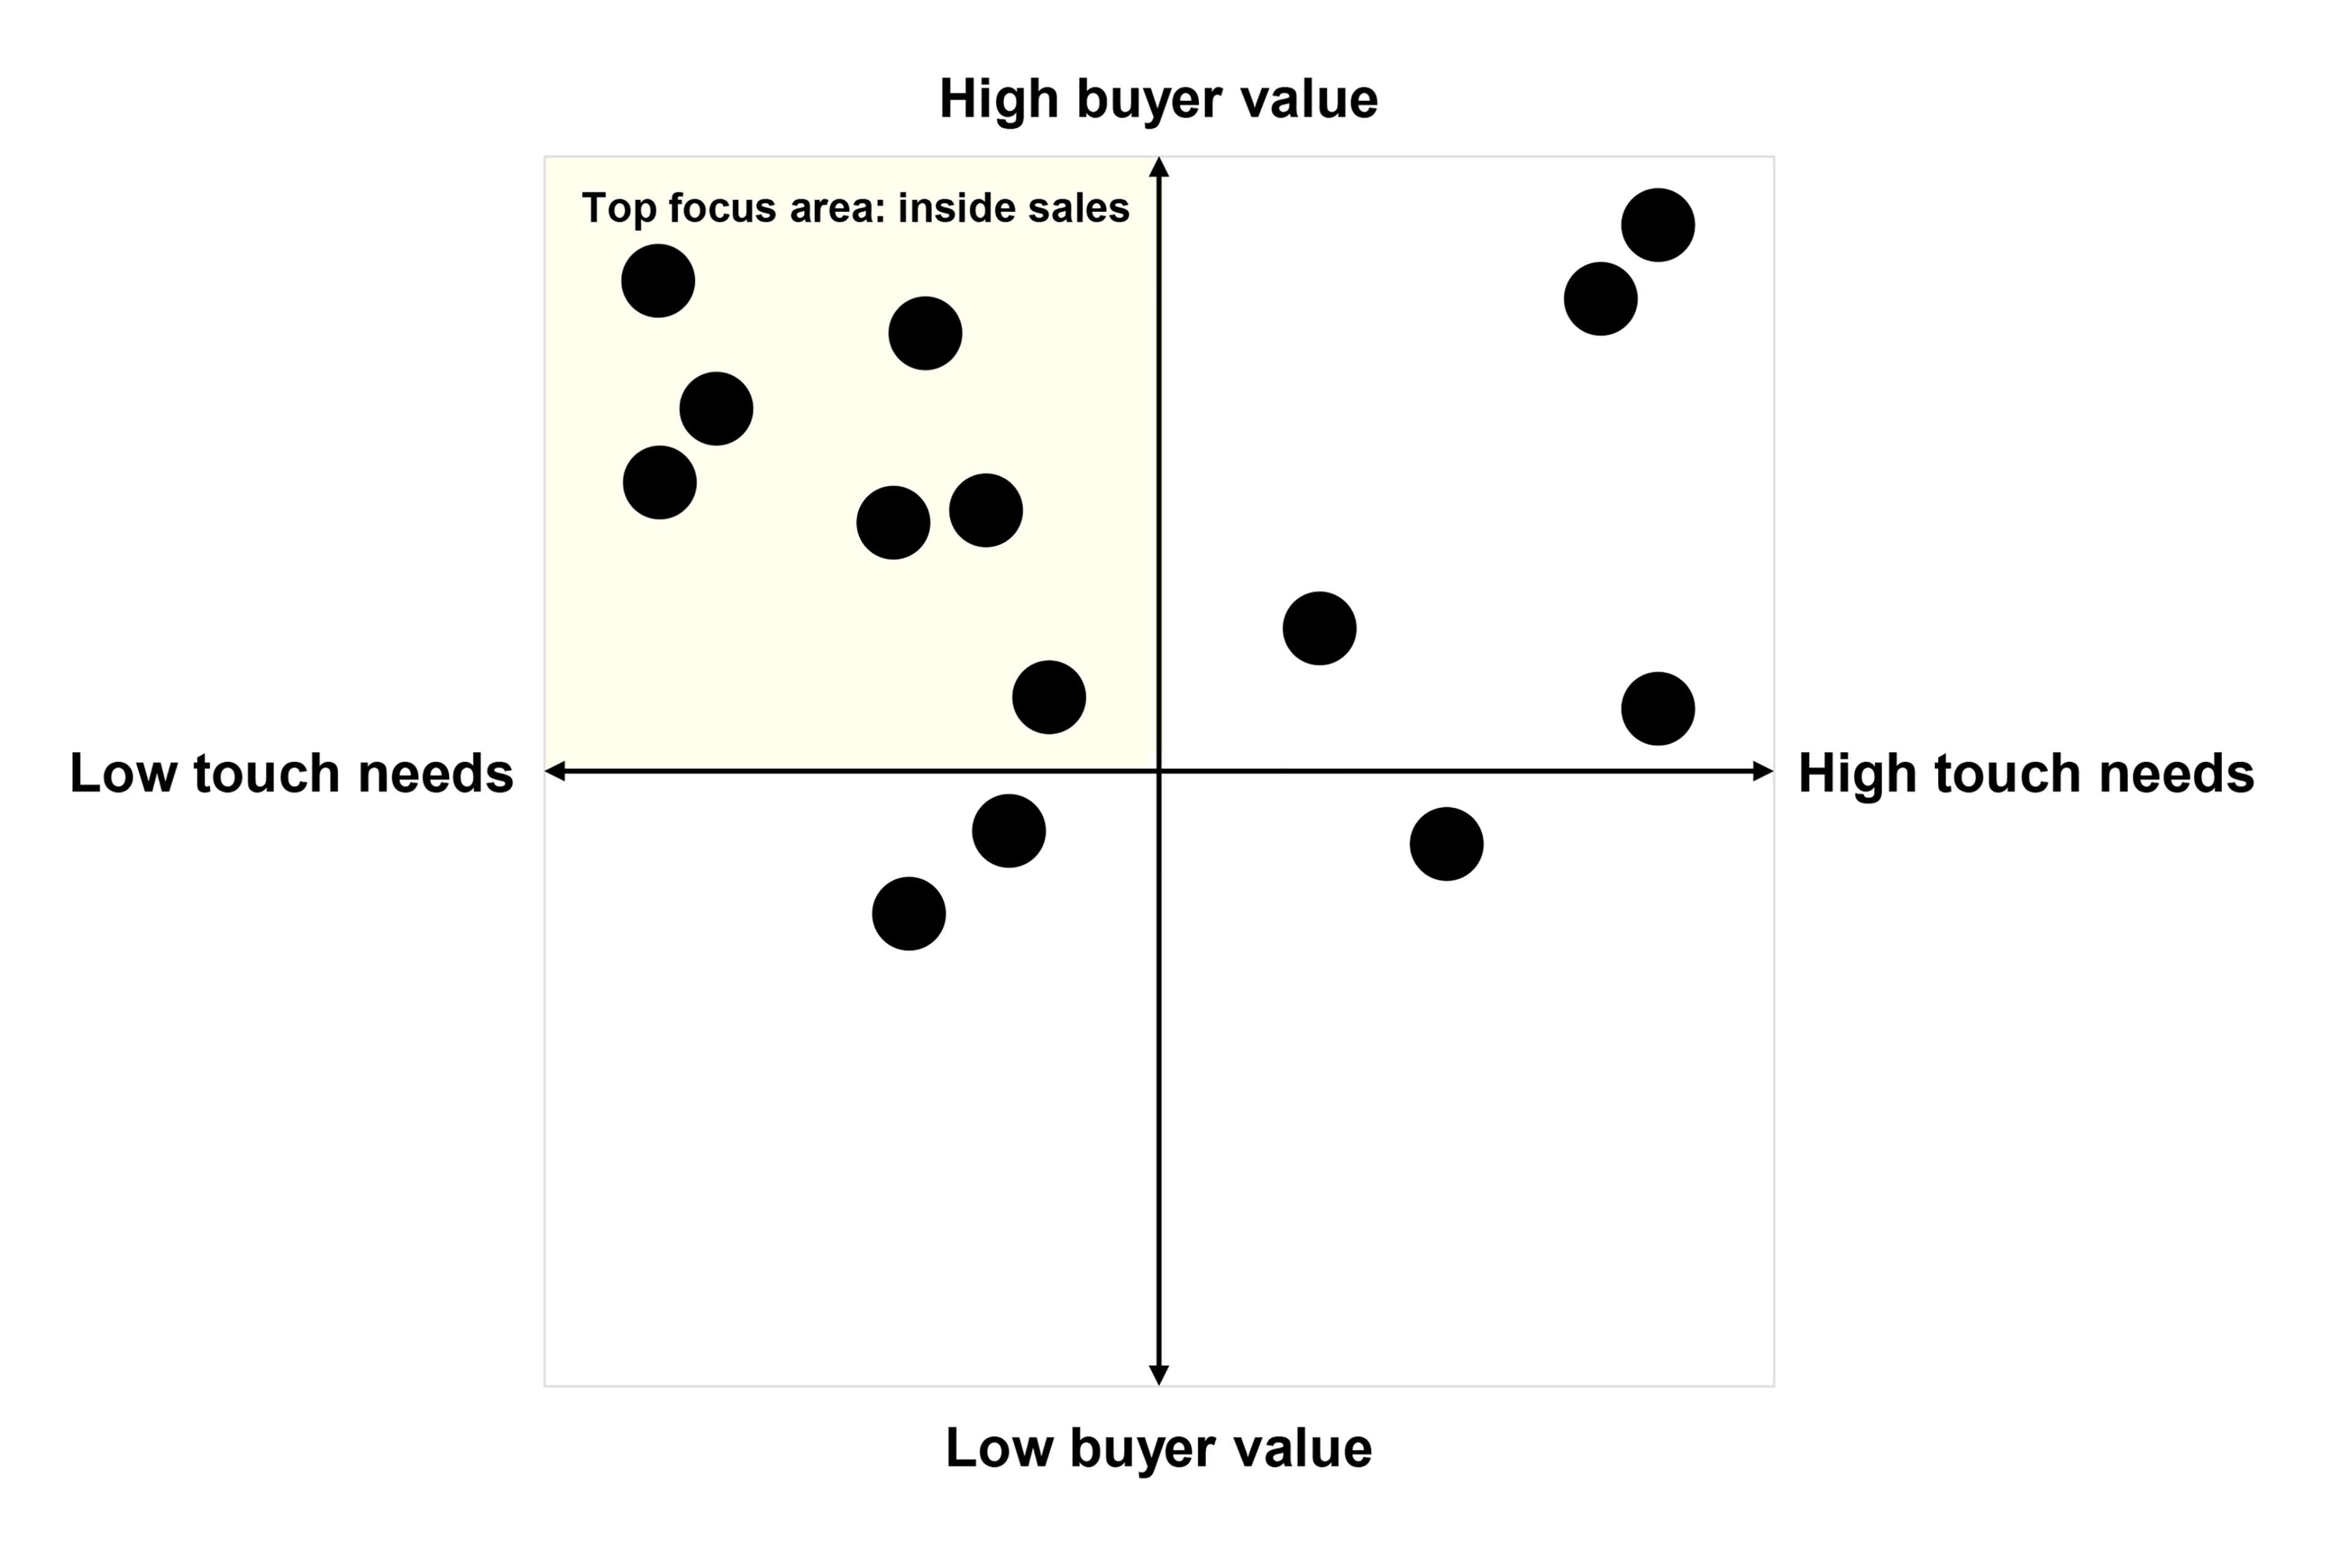 EY - Think more deeply about segmentation